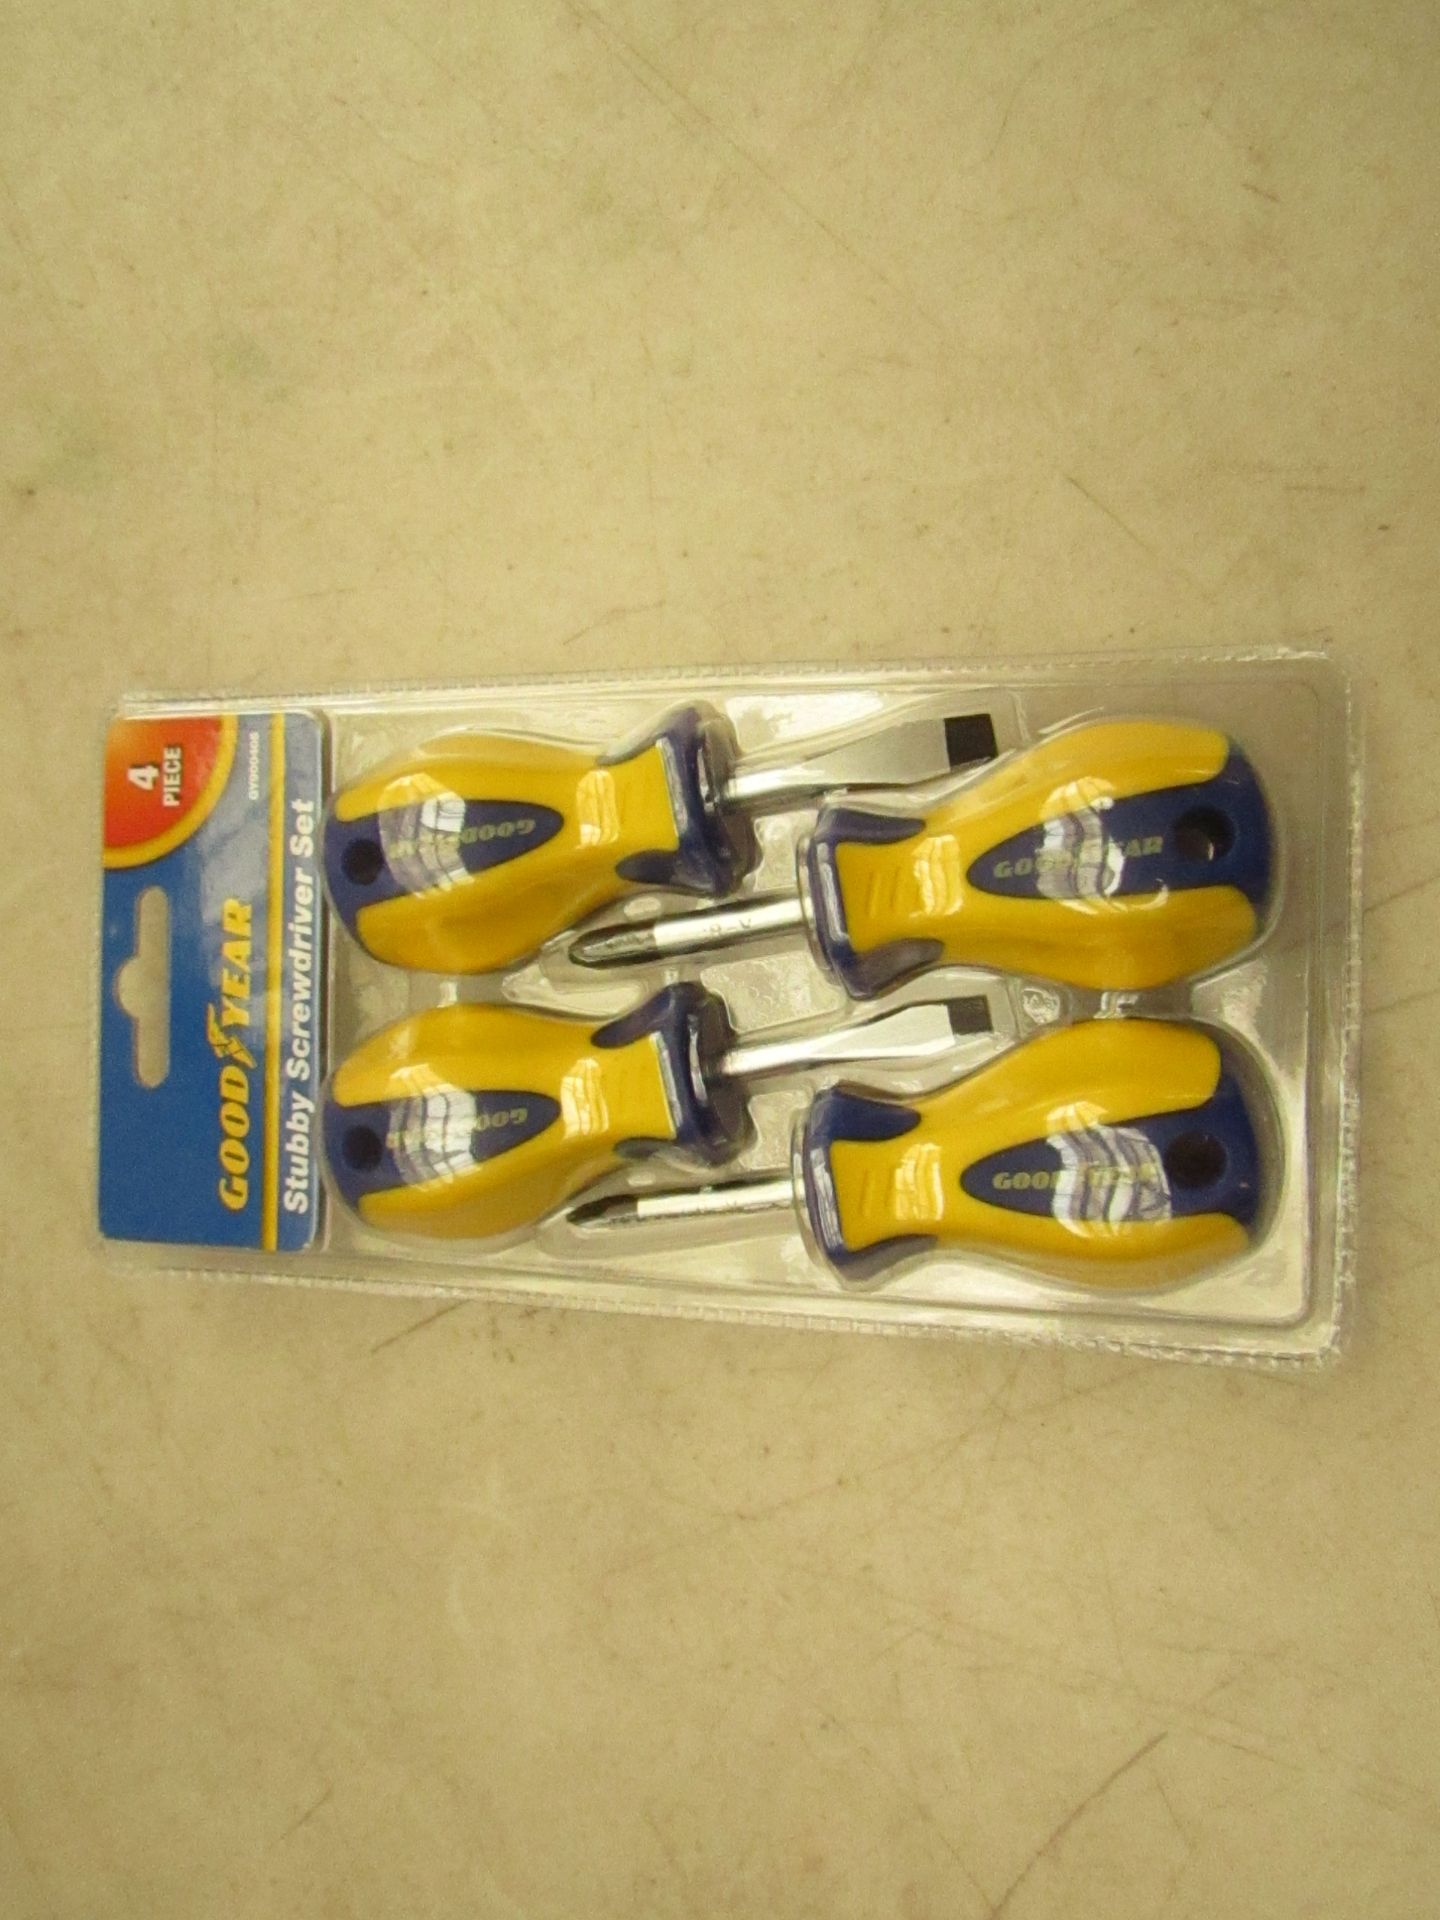 Good Year 4 piece stubby screwdriver set, new in packaging.